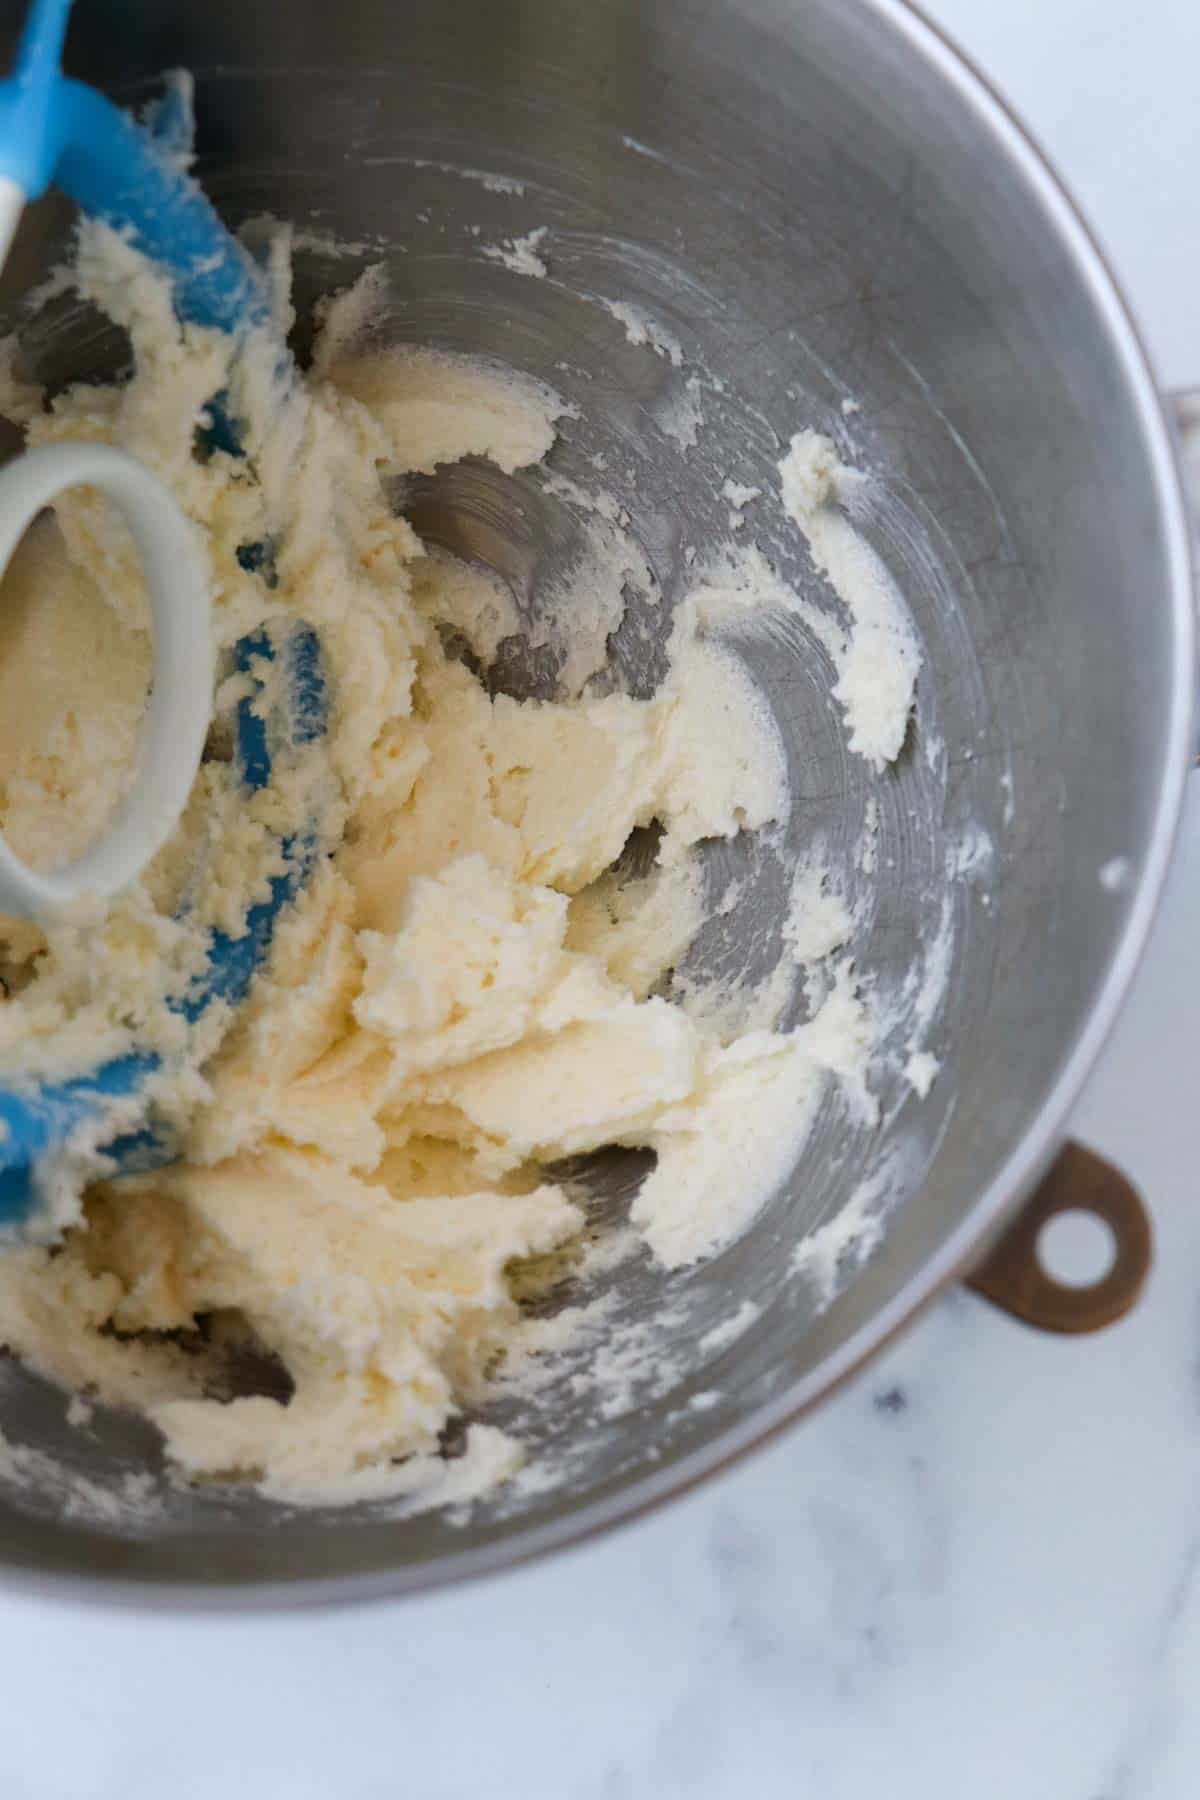 Butter and sugar creamed together in a metal bowl with a blue paddle attachment for a mixer.